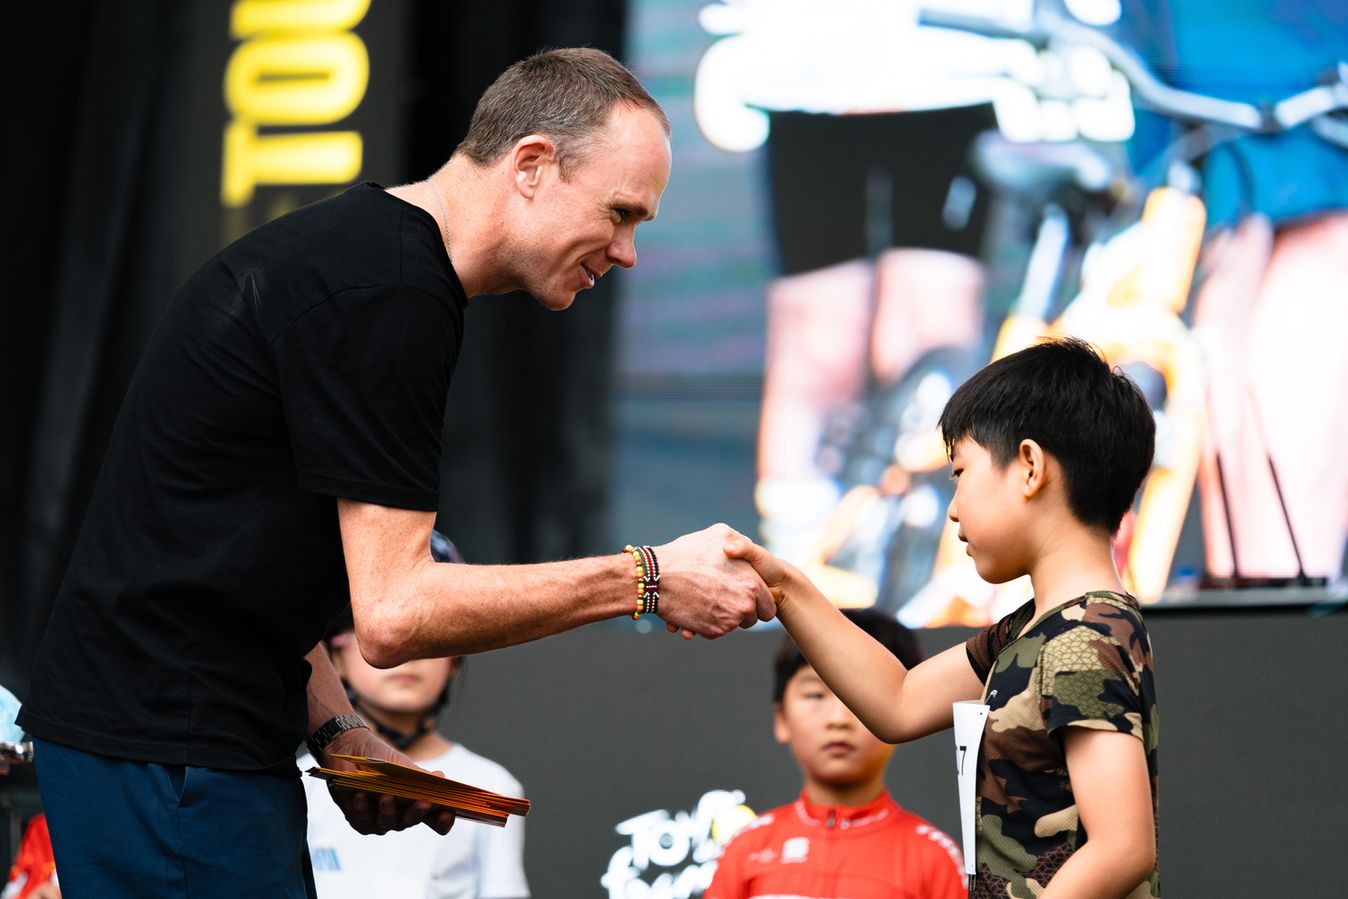 Froome remains one of cycling's most visible ambassadors, and takes enjoyment out of spreading his passion for the sport 